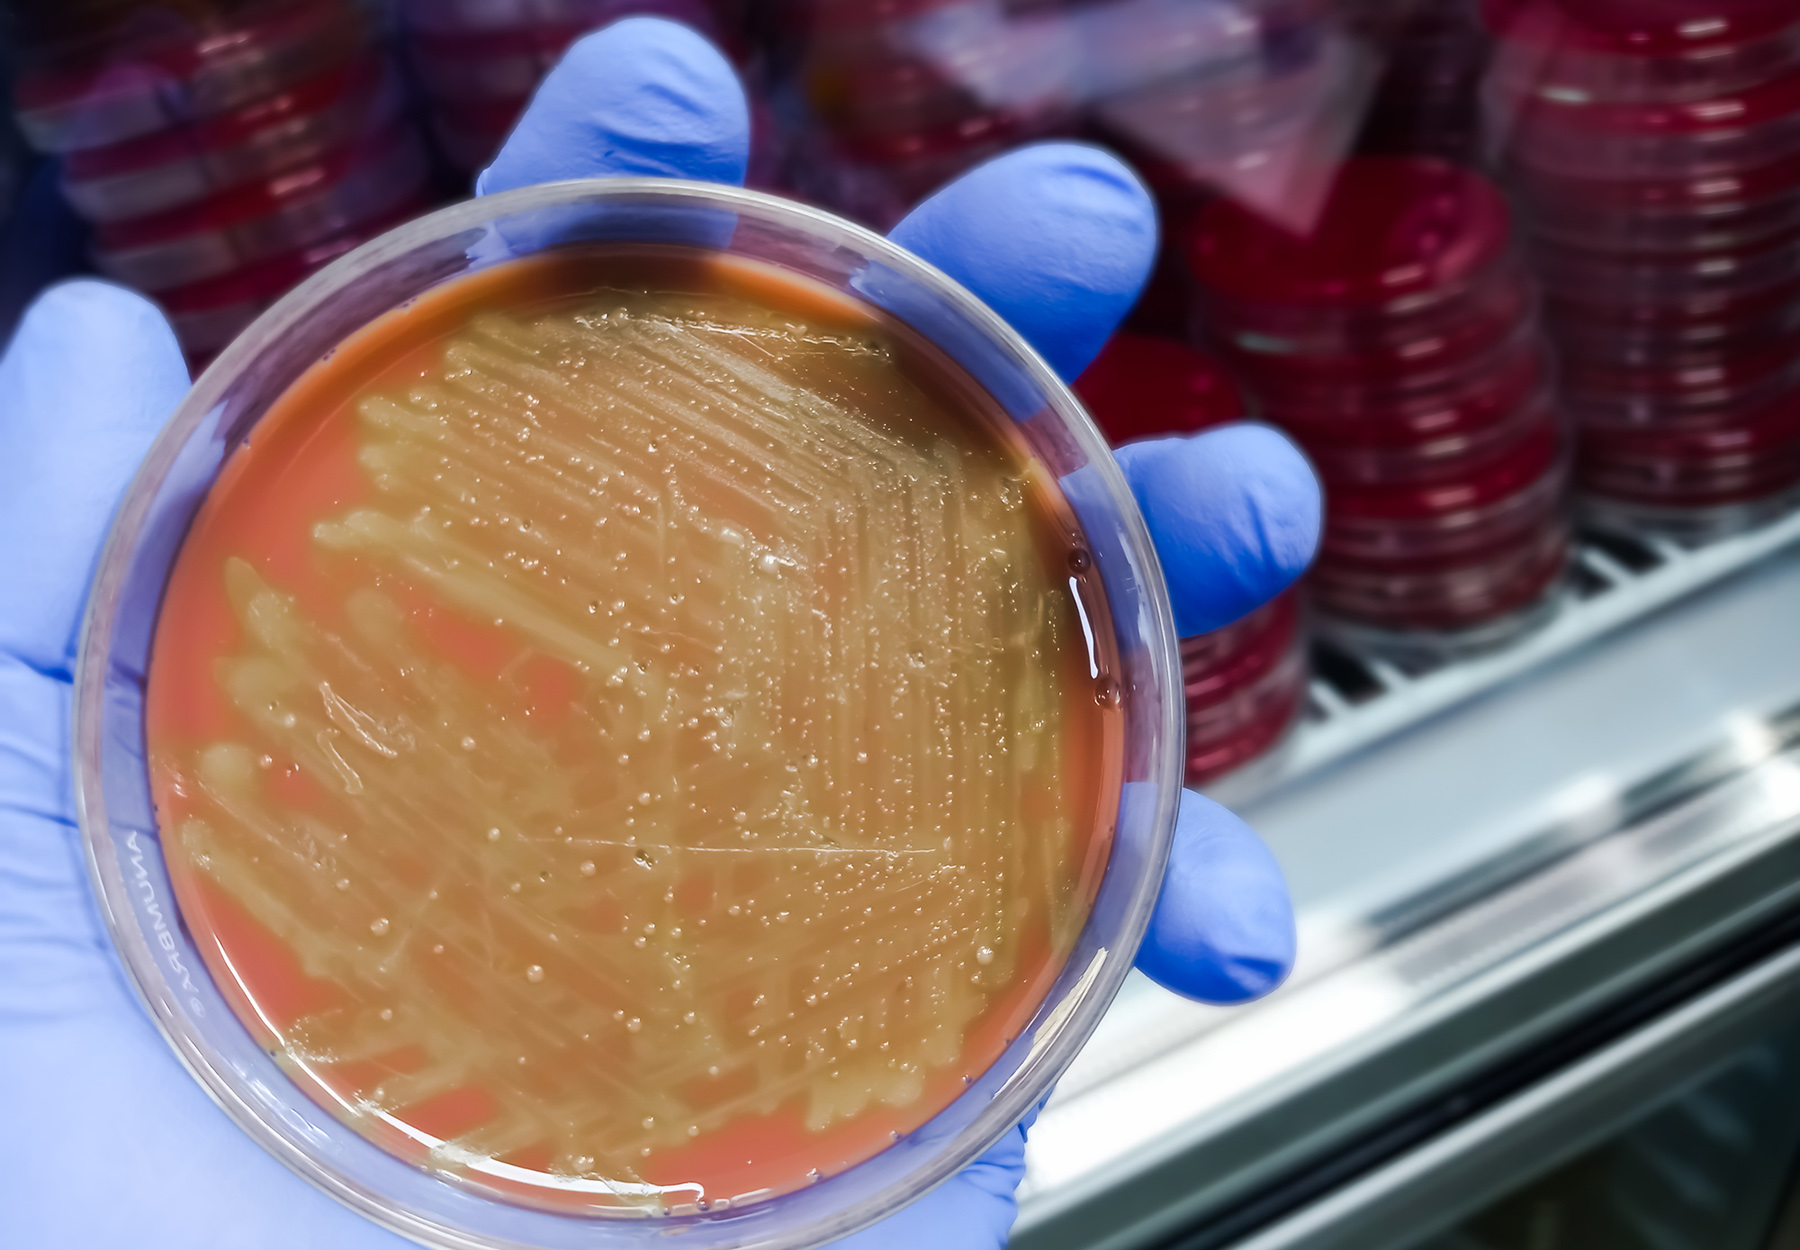 Gloved hand of lab worker holding an agar plate. Strep bacteria testing concept. iStock image.